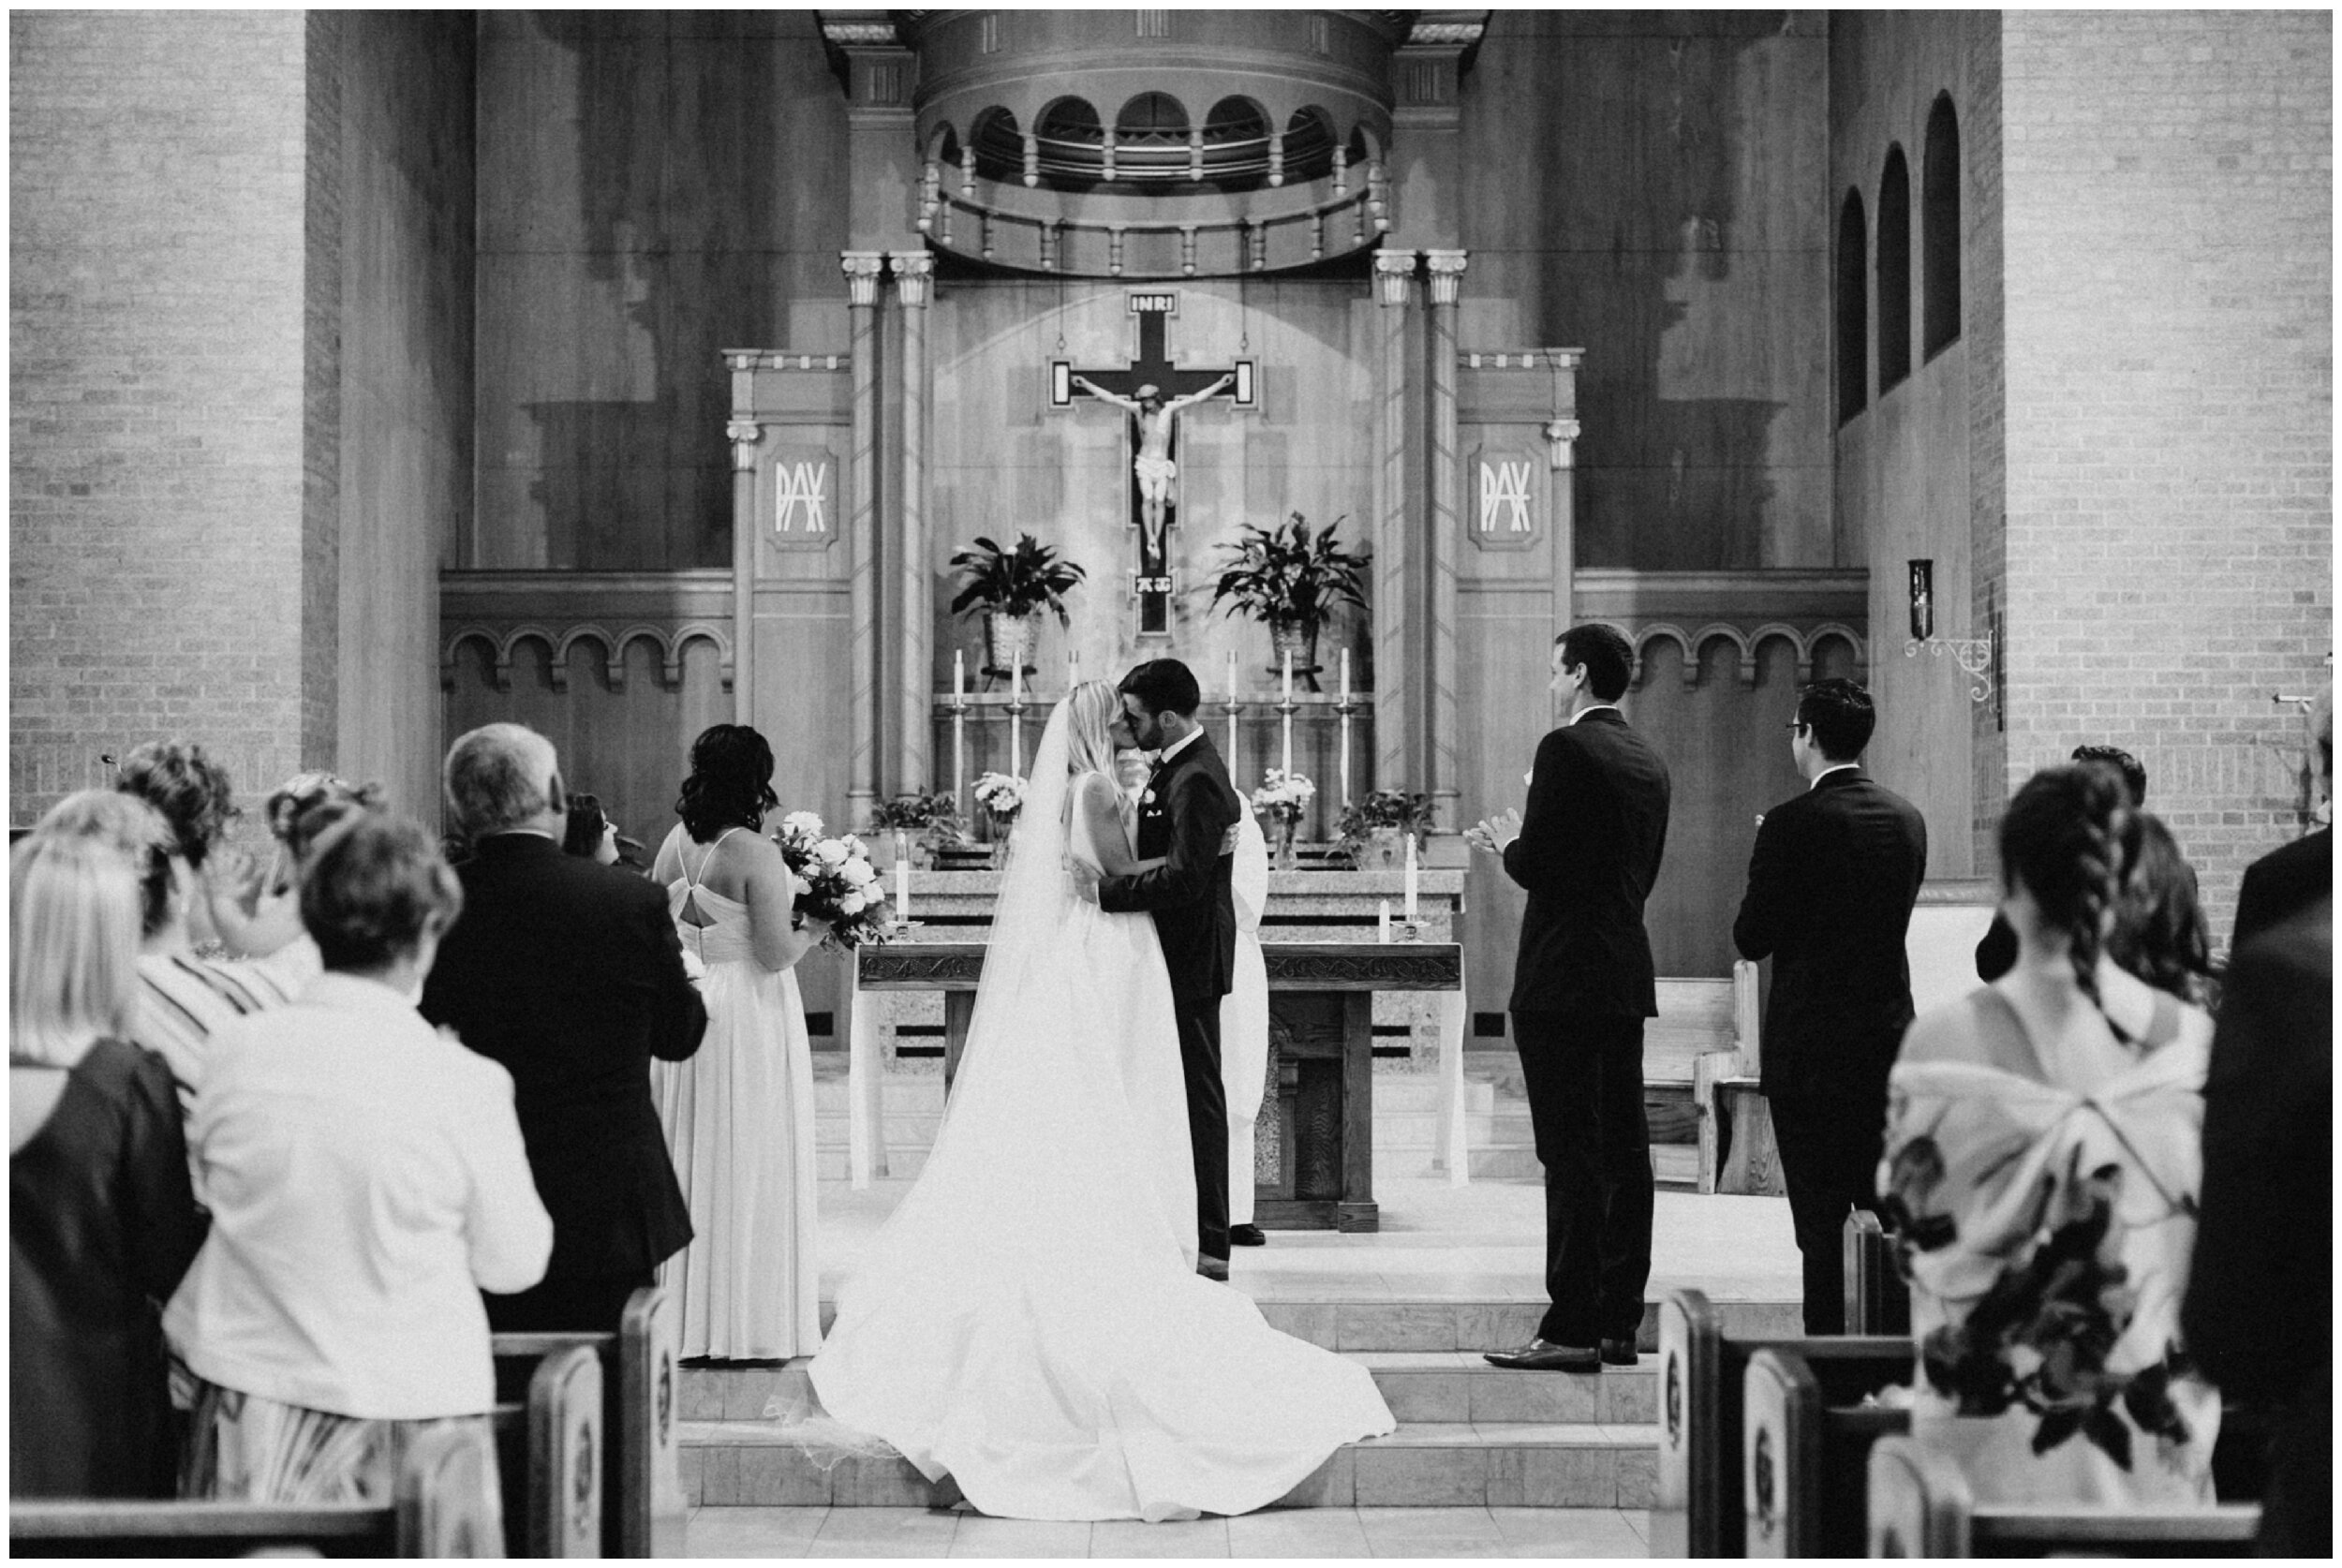 Bride and groom kiss during cathedral wedding ceremony in Brainerd Minnesota 